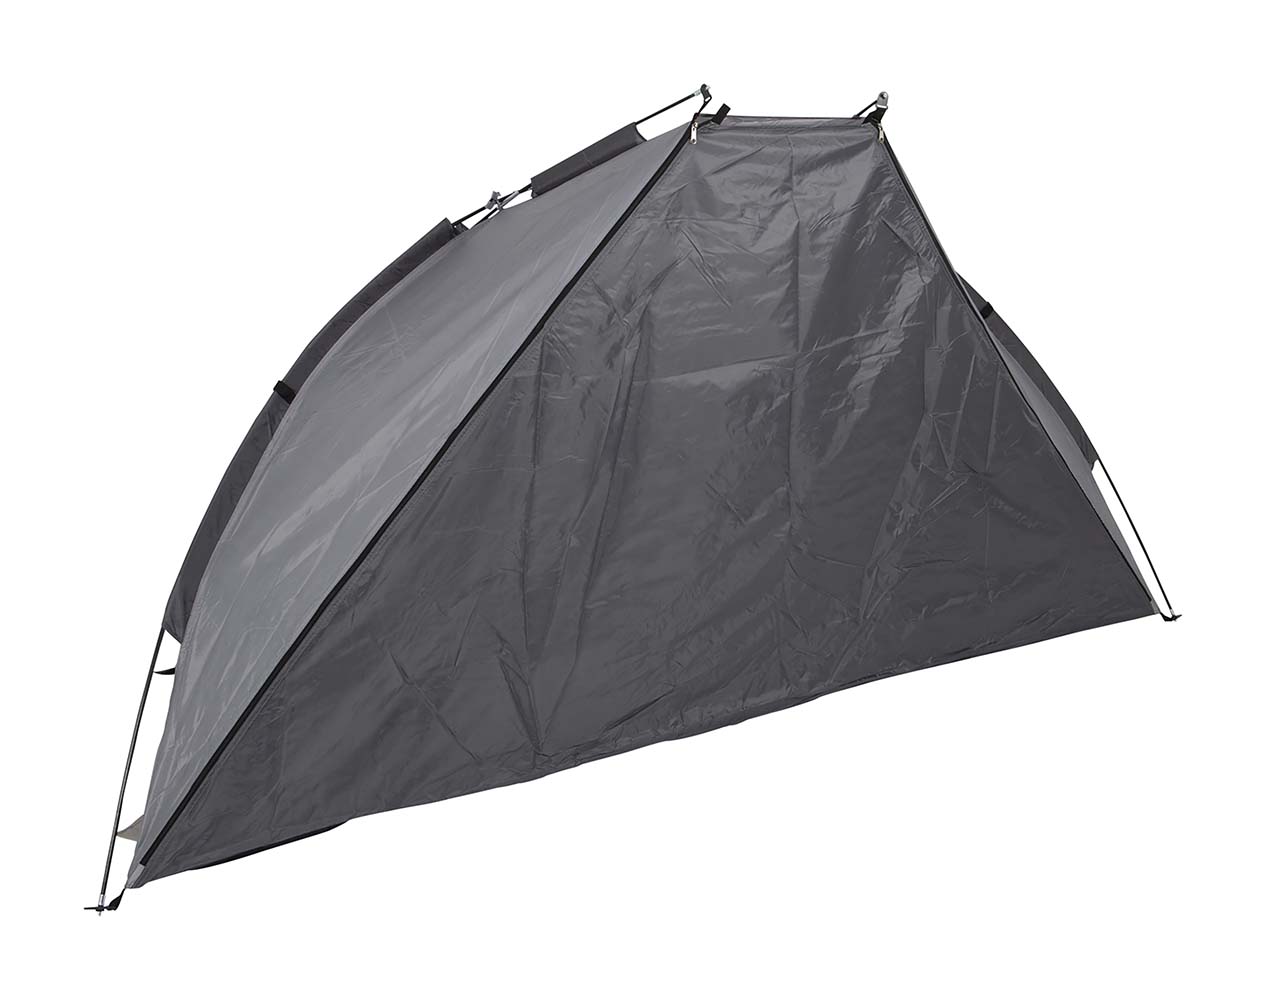 4367672 Super convenient tent for a day out. The beach tent is easy and quick to set up. In addition, the beach tent can be completely closed off. This prevents sand from entering the tent and allows items to be stored out of sight. The beach tent is made of strong 170t polyester and has a waterproof and tear-resistant PE groundsheet. The tent has a window for extra ventilation. This can also be closed if required. Includes pegs and a handy carrying bag.